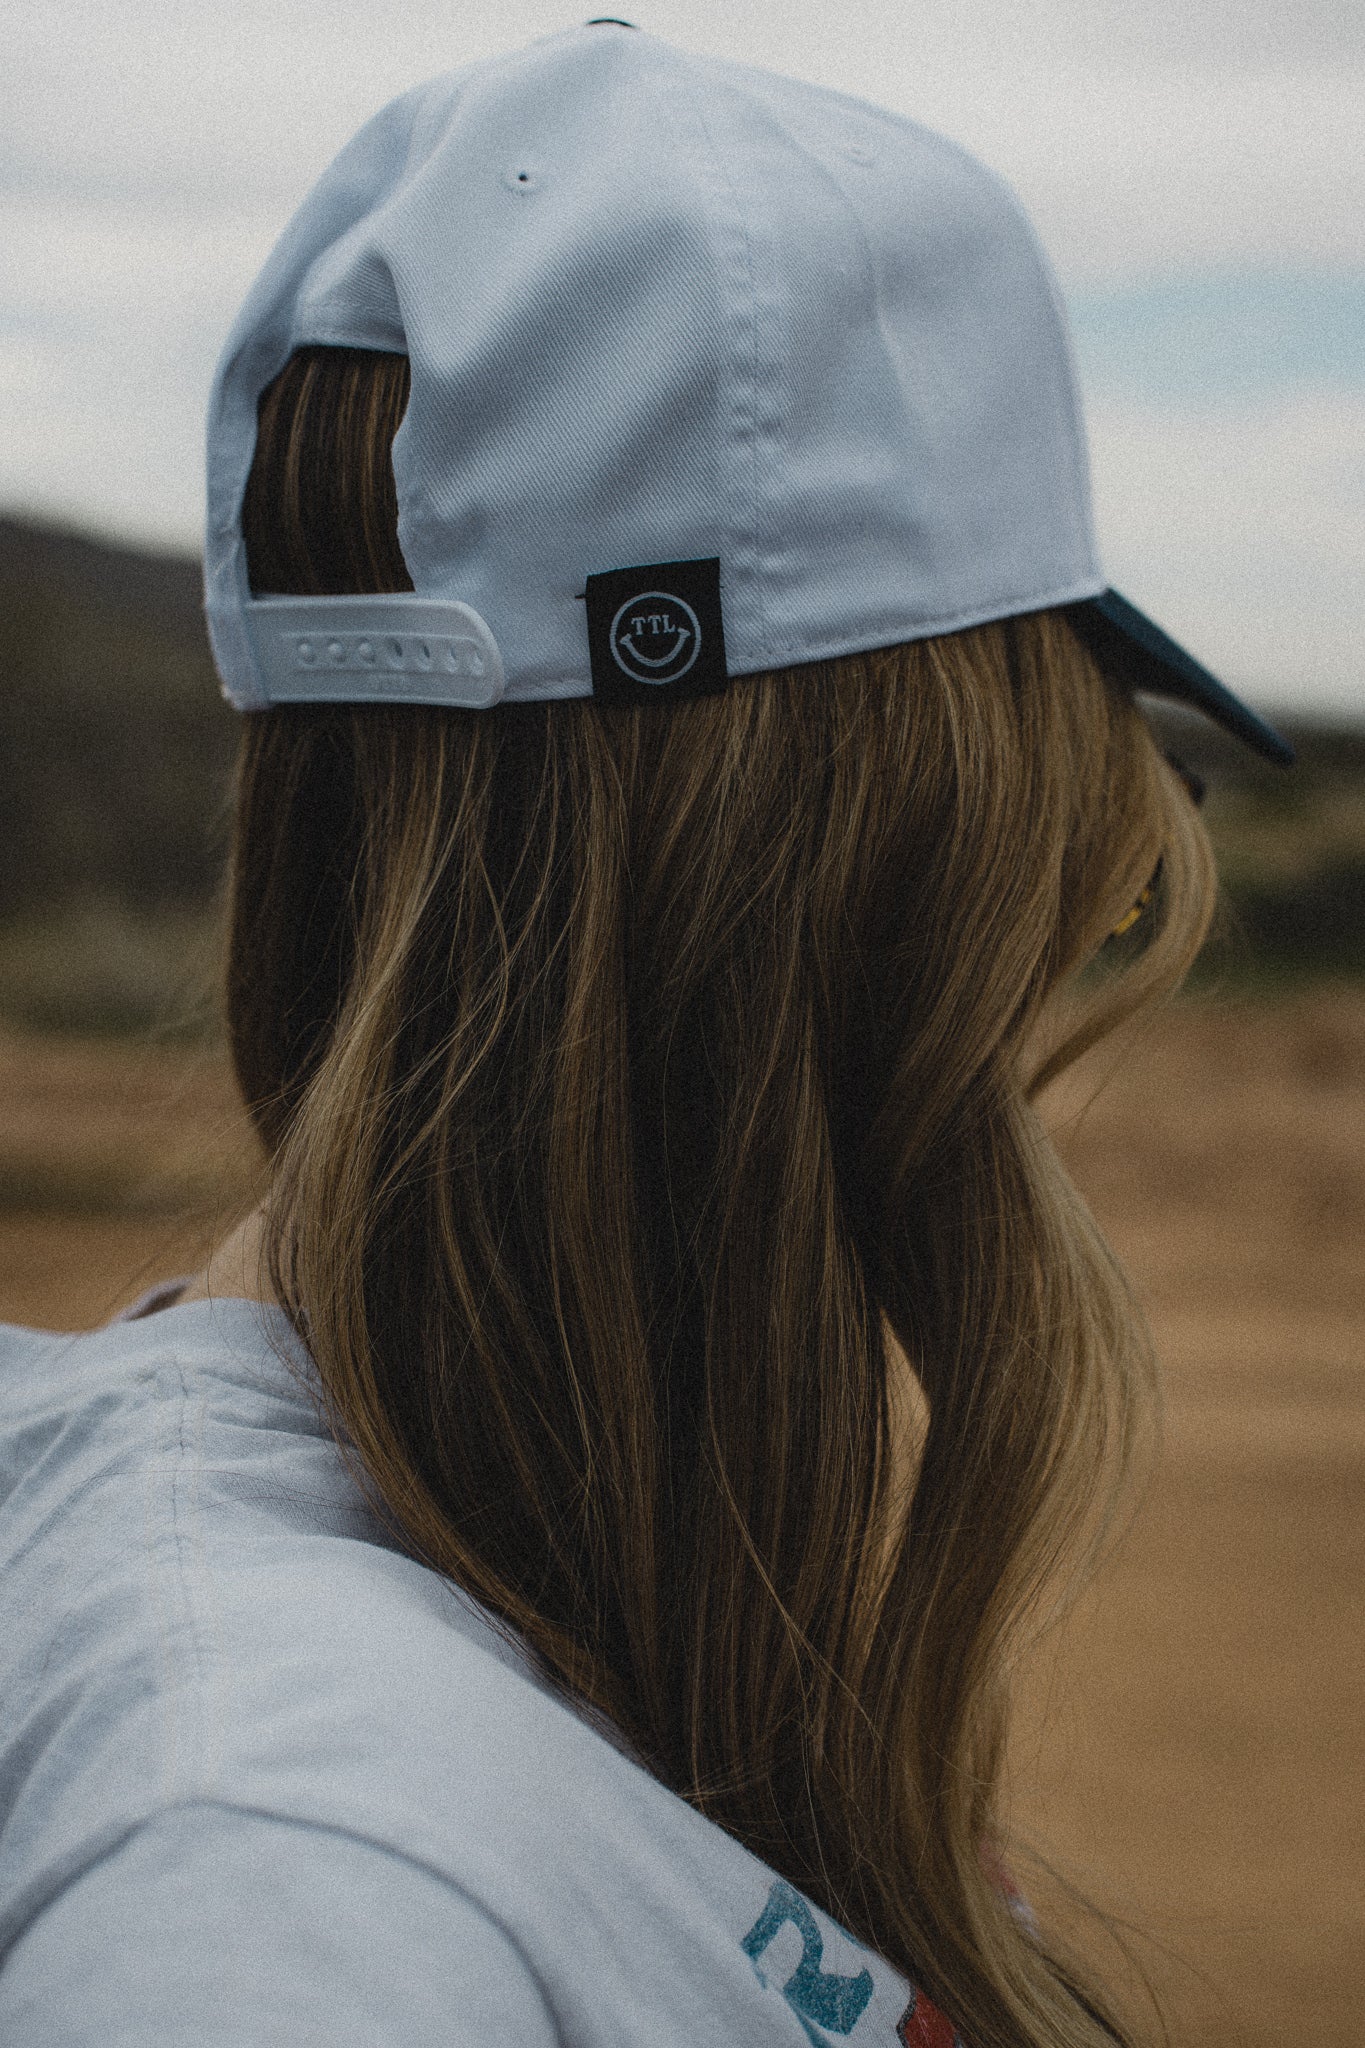 BE KIND. HAT - WHITE/BLUE CLASSIC